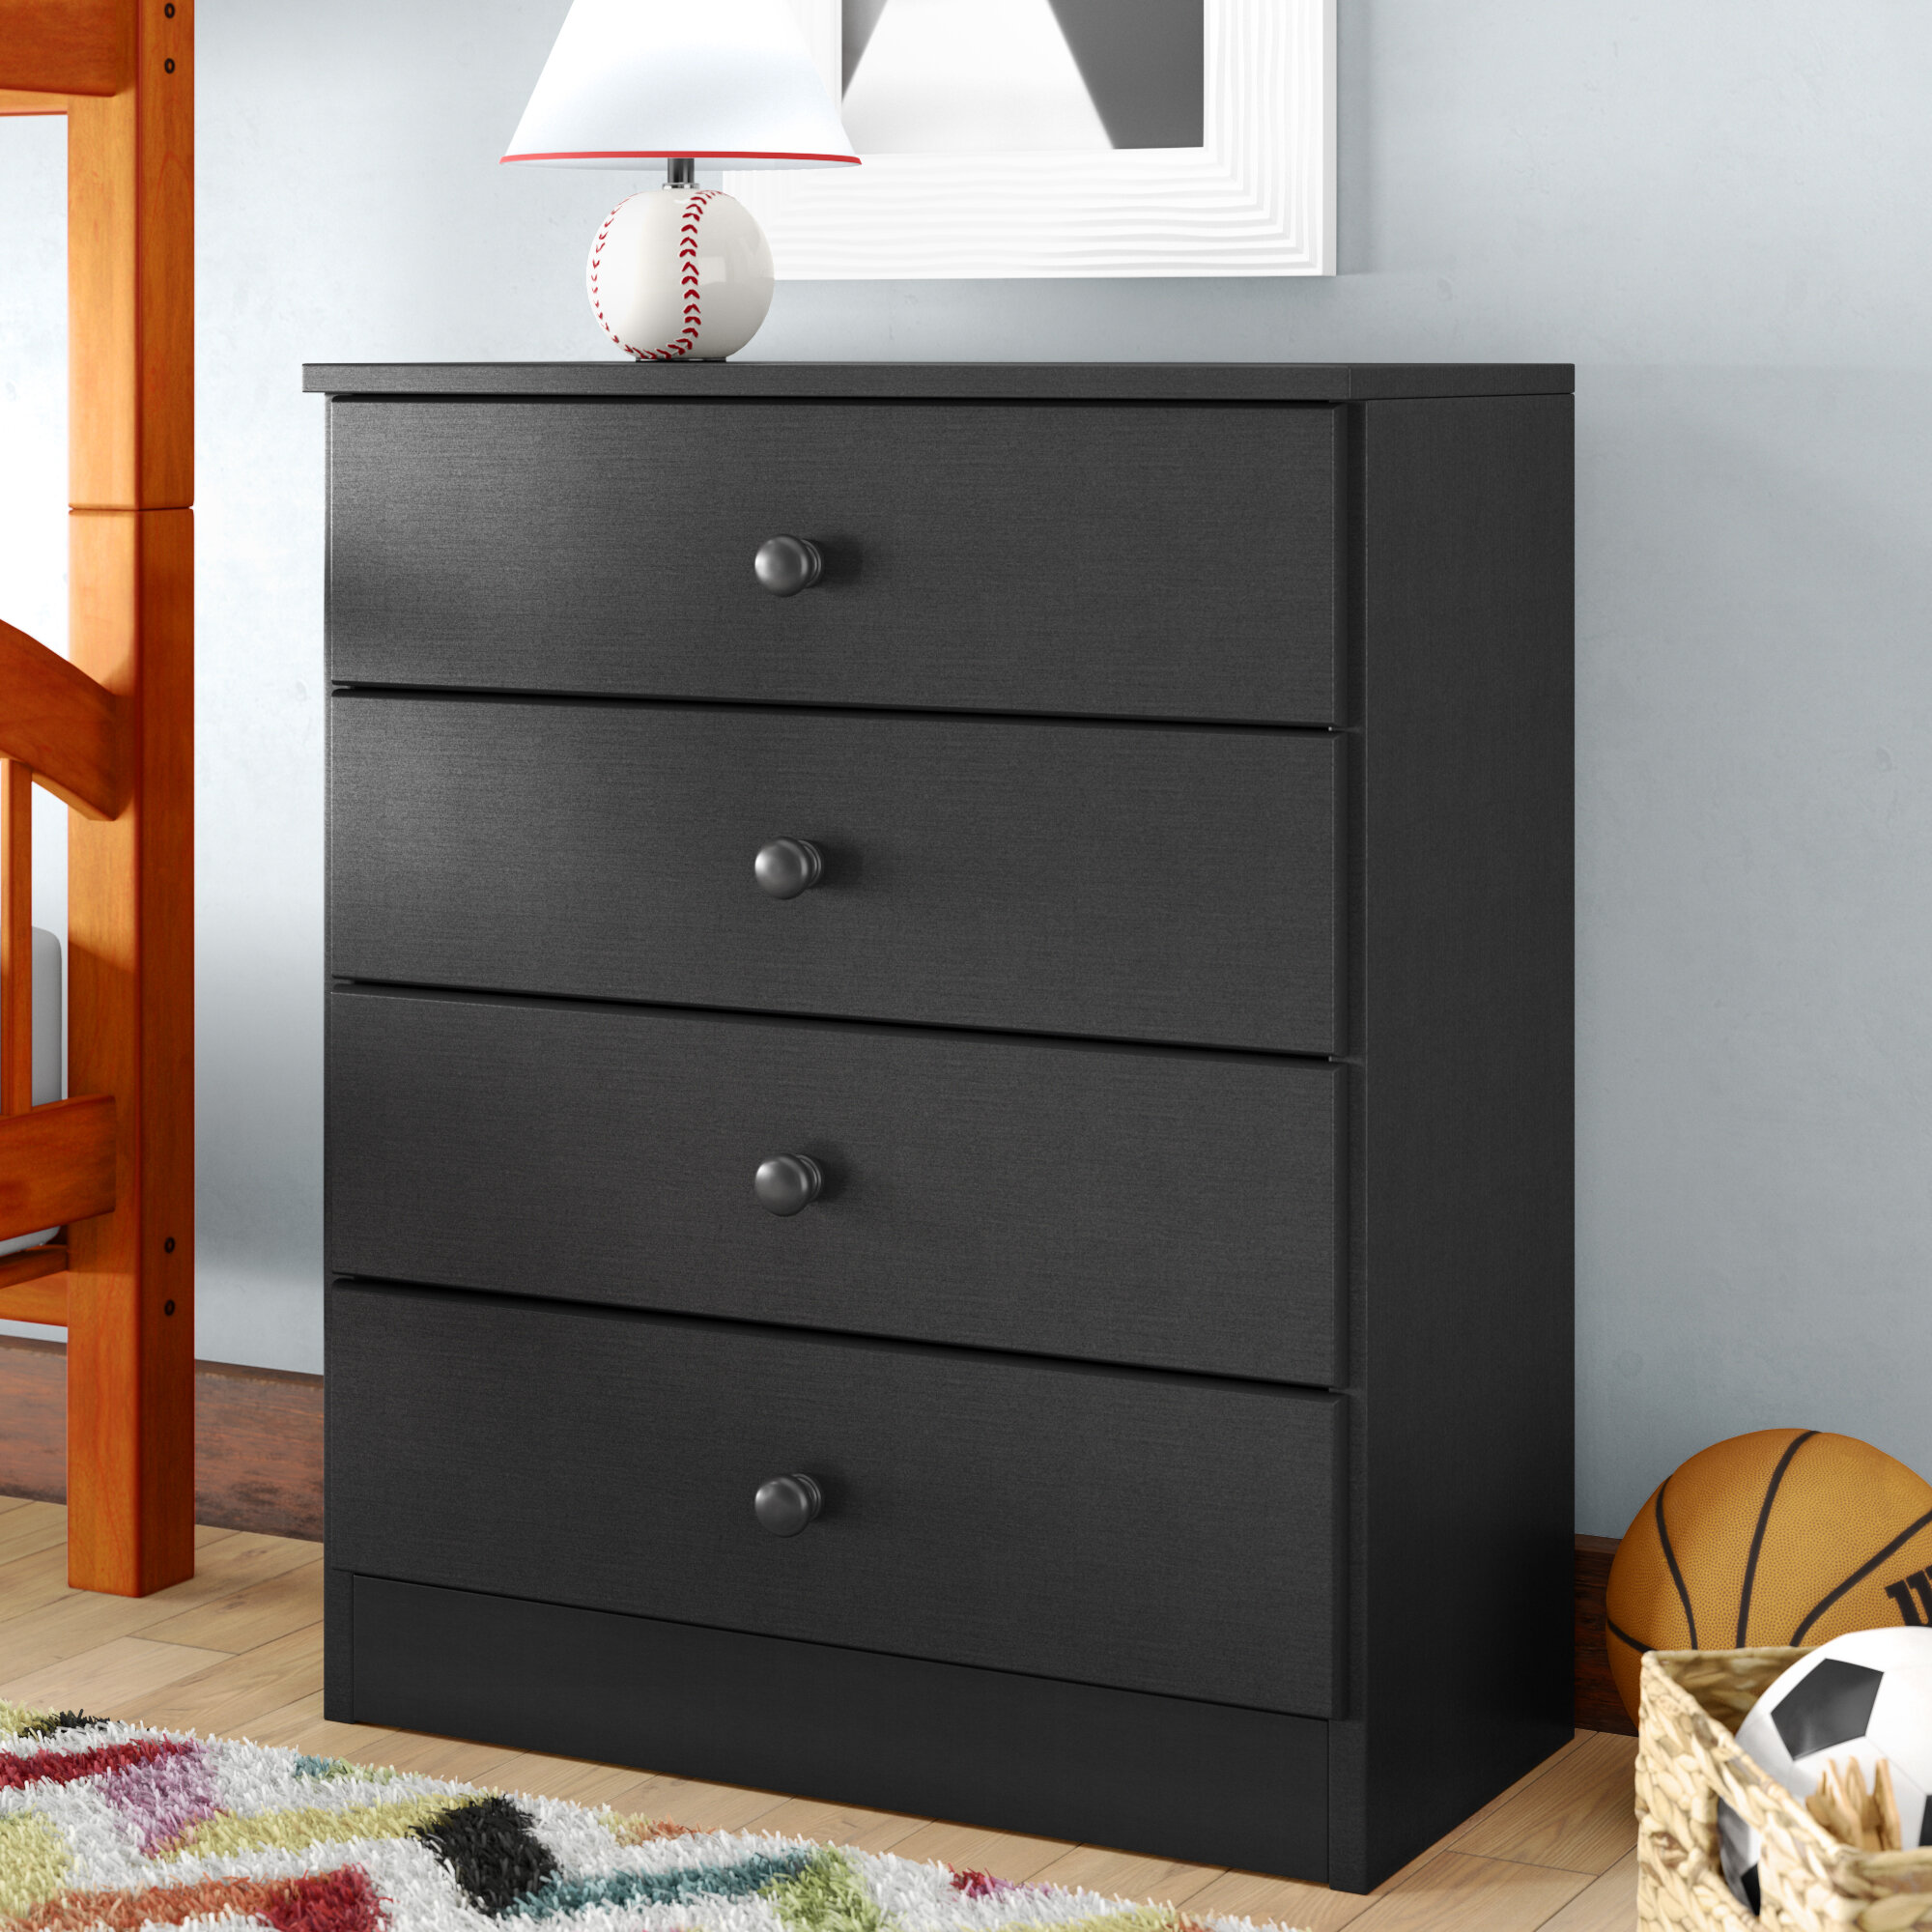 Dressers For Bedroom Long Espresso 6 Drawer Nursery Teen Girl Boy Adults Dressers Chests Of Drawers Home Garden